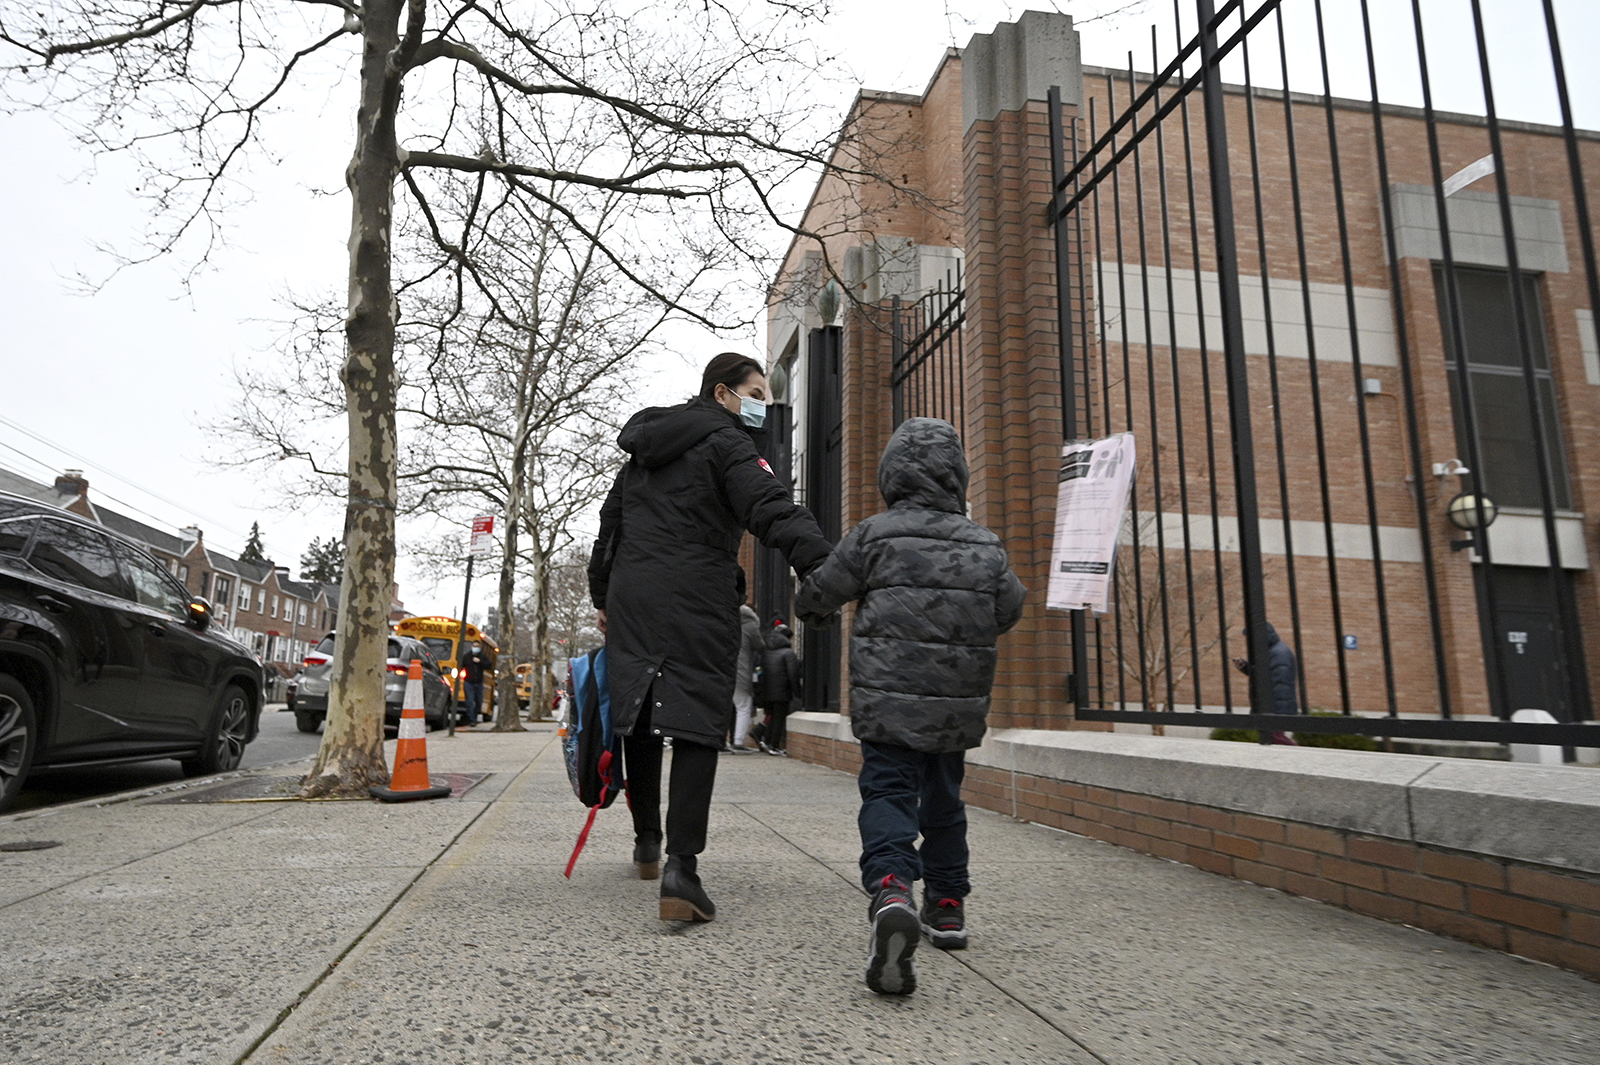 A parent accompanies her child to school on the first day back after winter break, in the Queens borough of New York City on January 3.